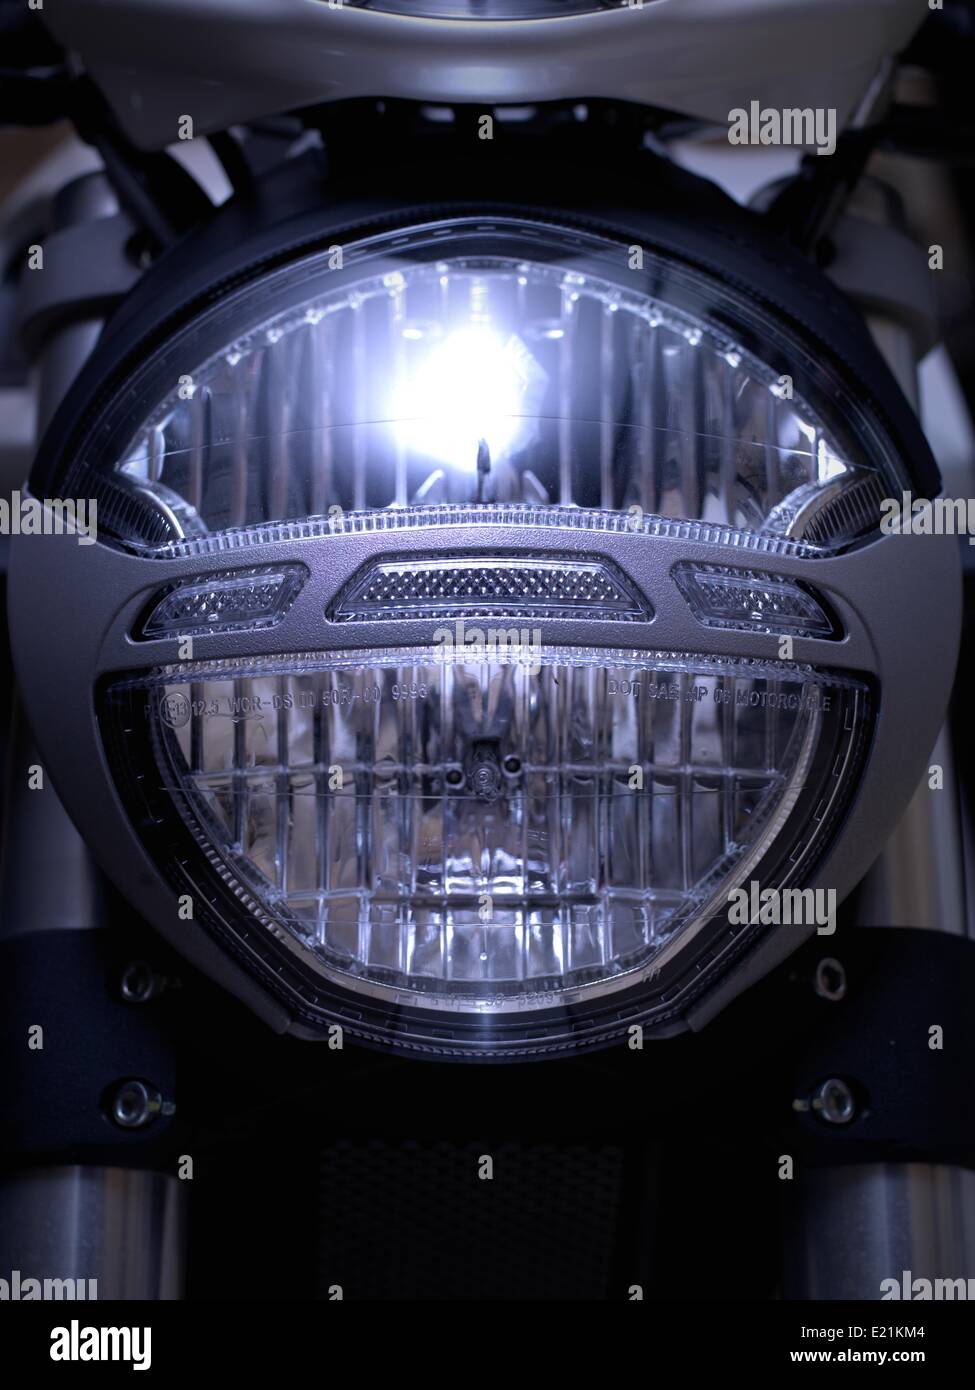 An image of a motorcycle headligh up close Stock Photo